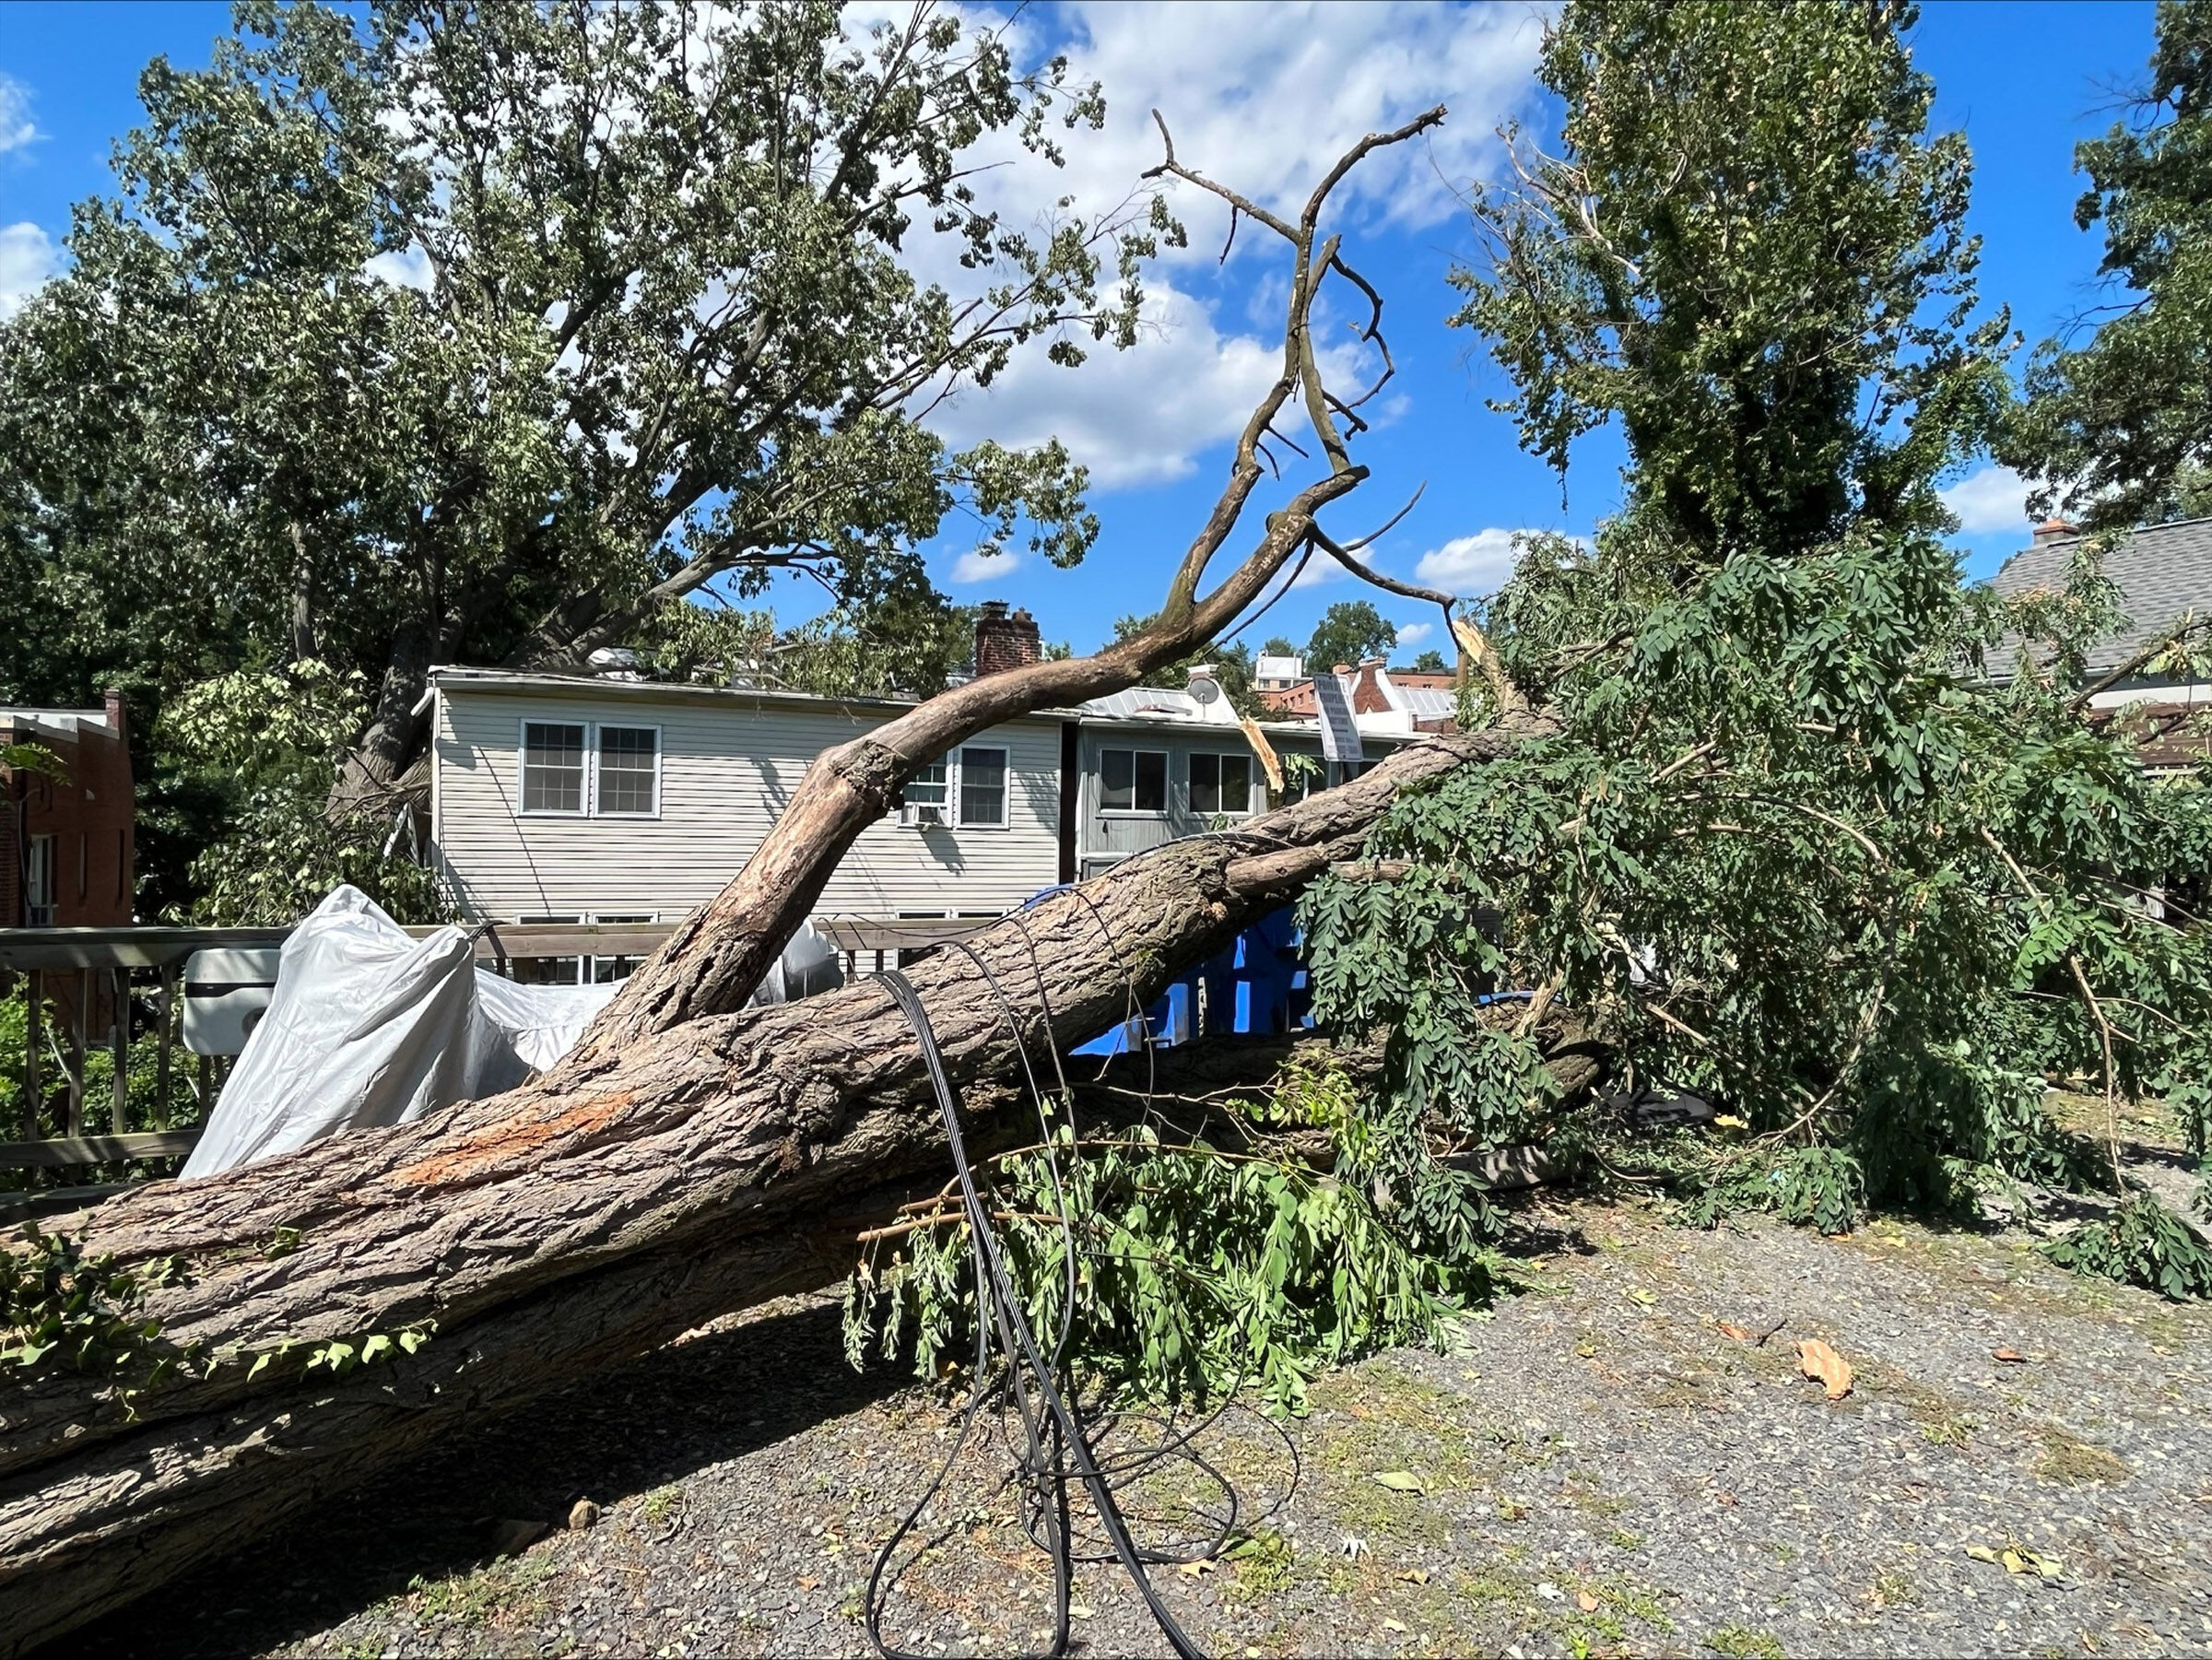 Three deaths confirmed from historic storm; thousands may be